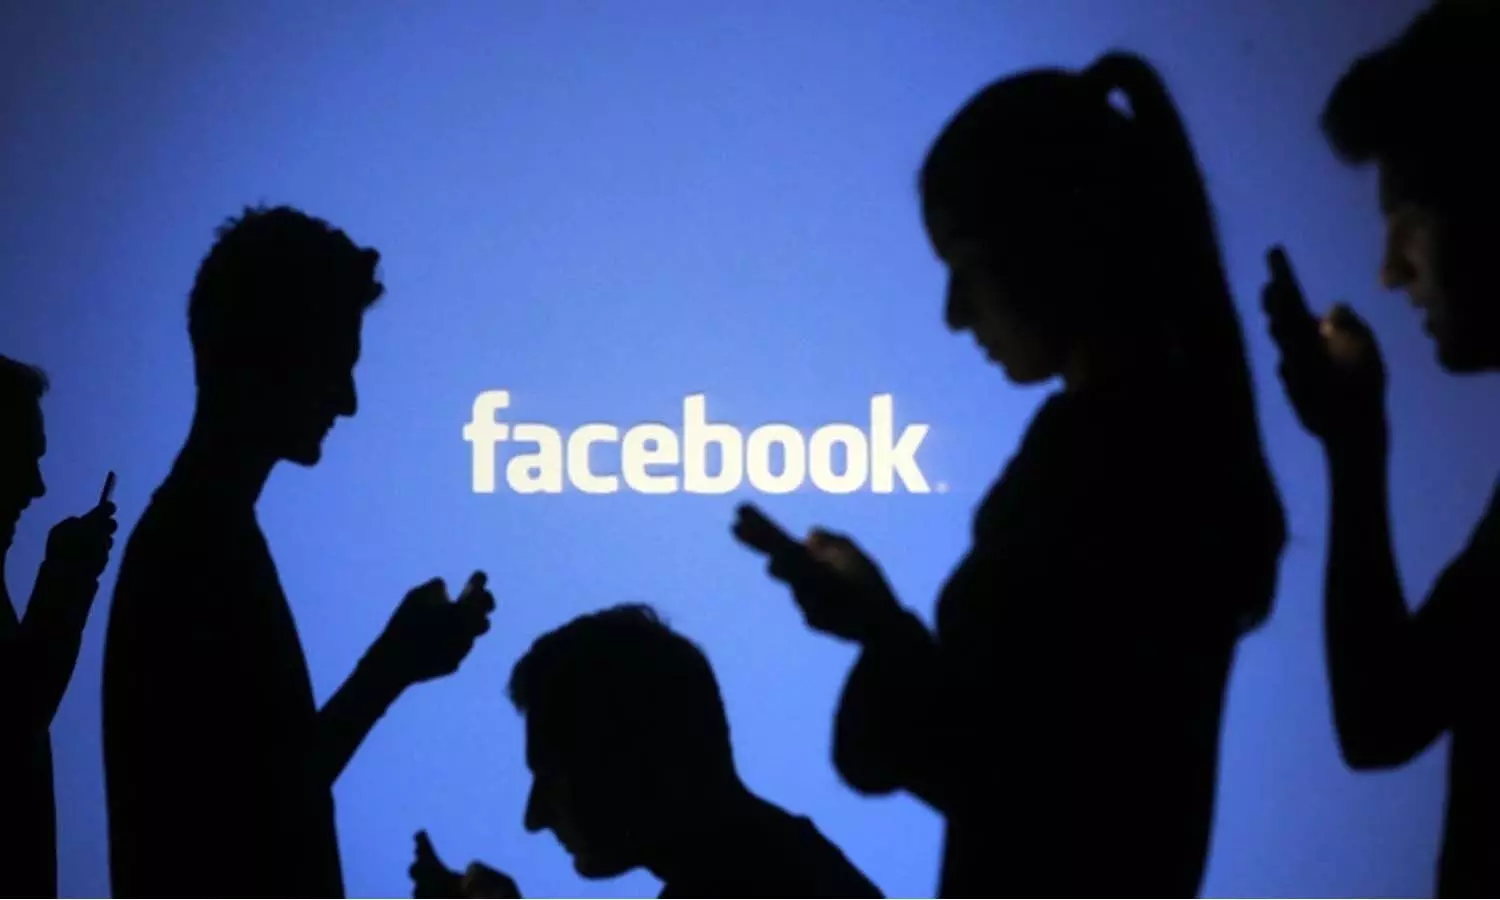 Phone numbers of nearly 500 million Facebook users up for sale